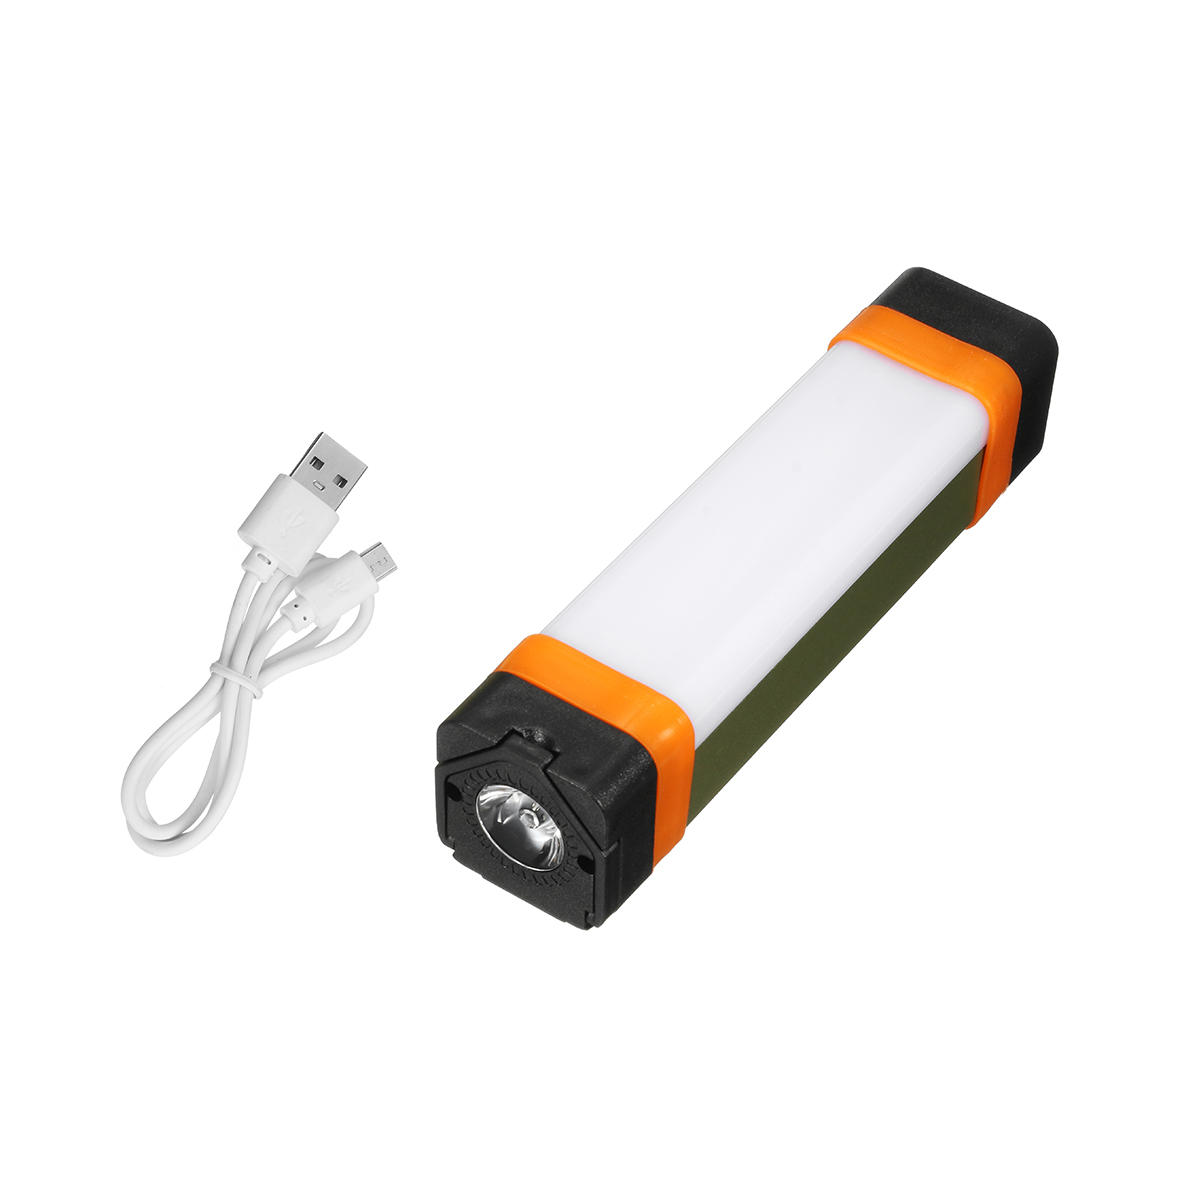 Outdoor Multifunction Camping Light USB Rechargeable Emergency Light Power Bank Lamp Work Light with Magnet and Hook